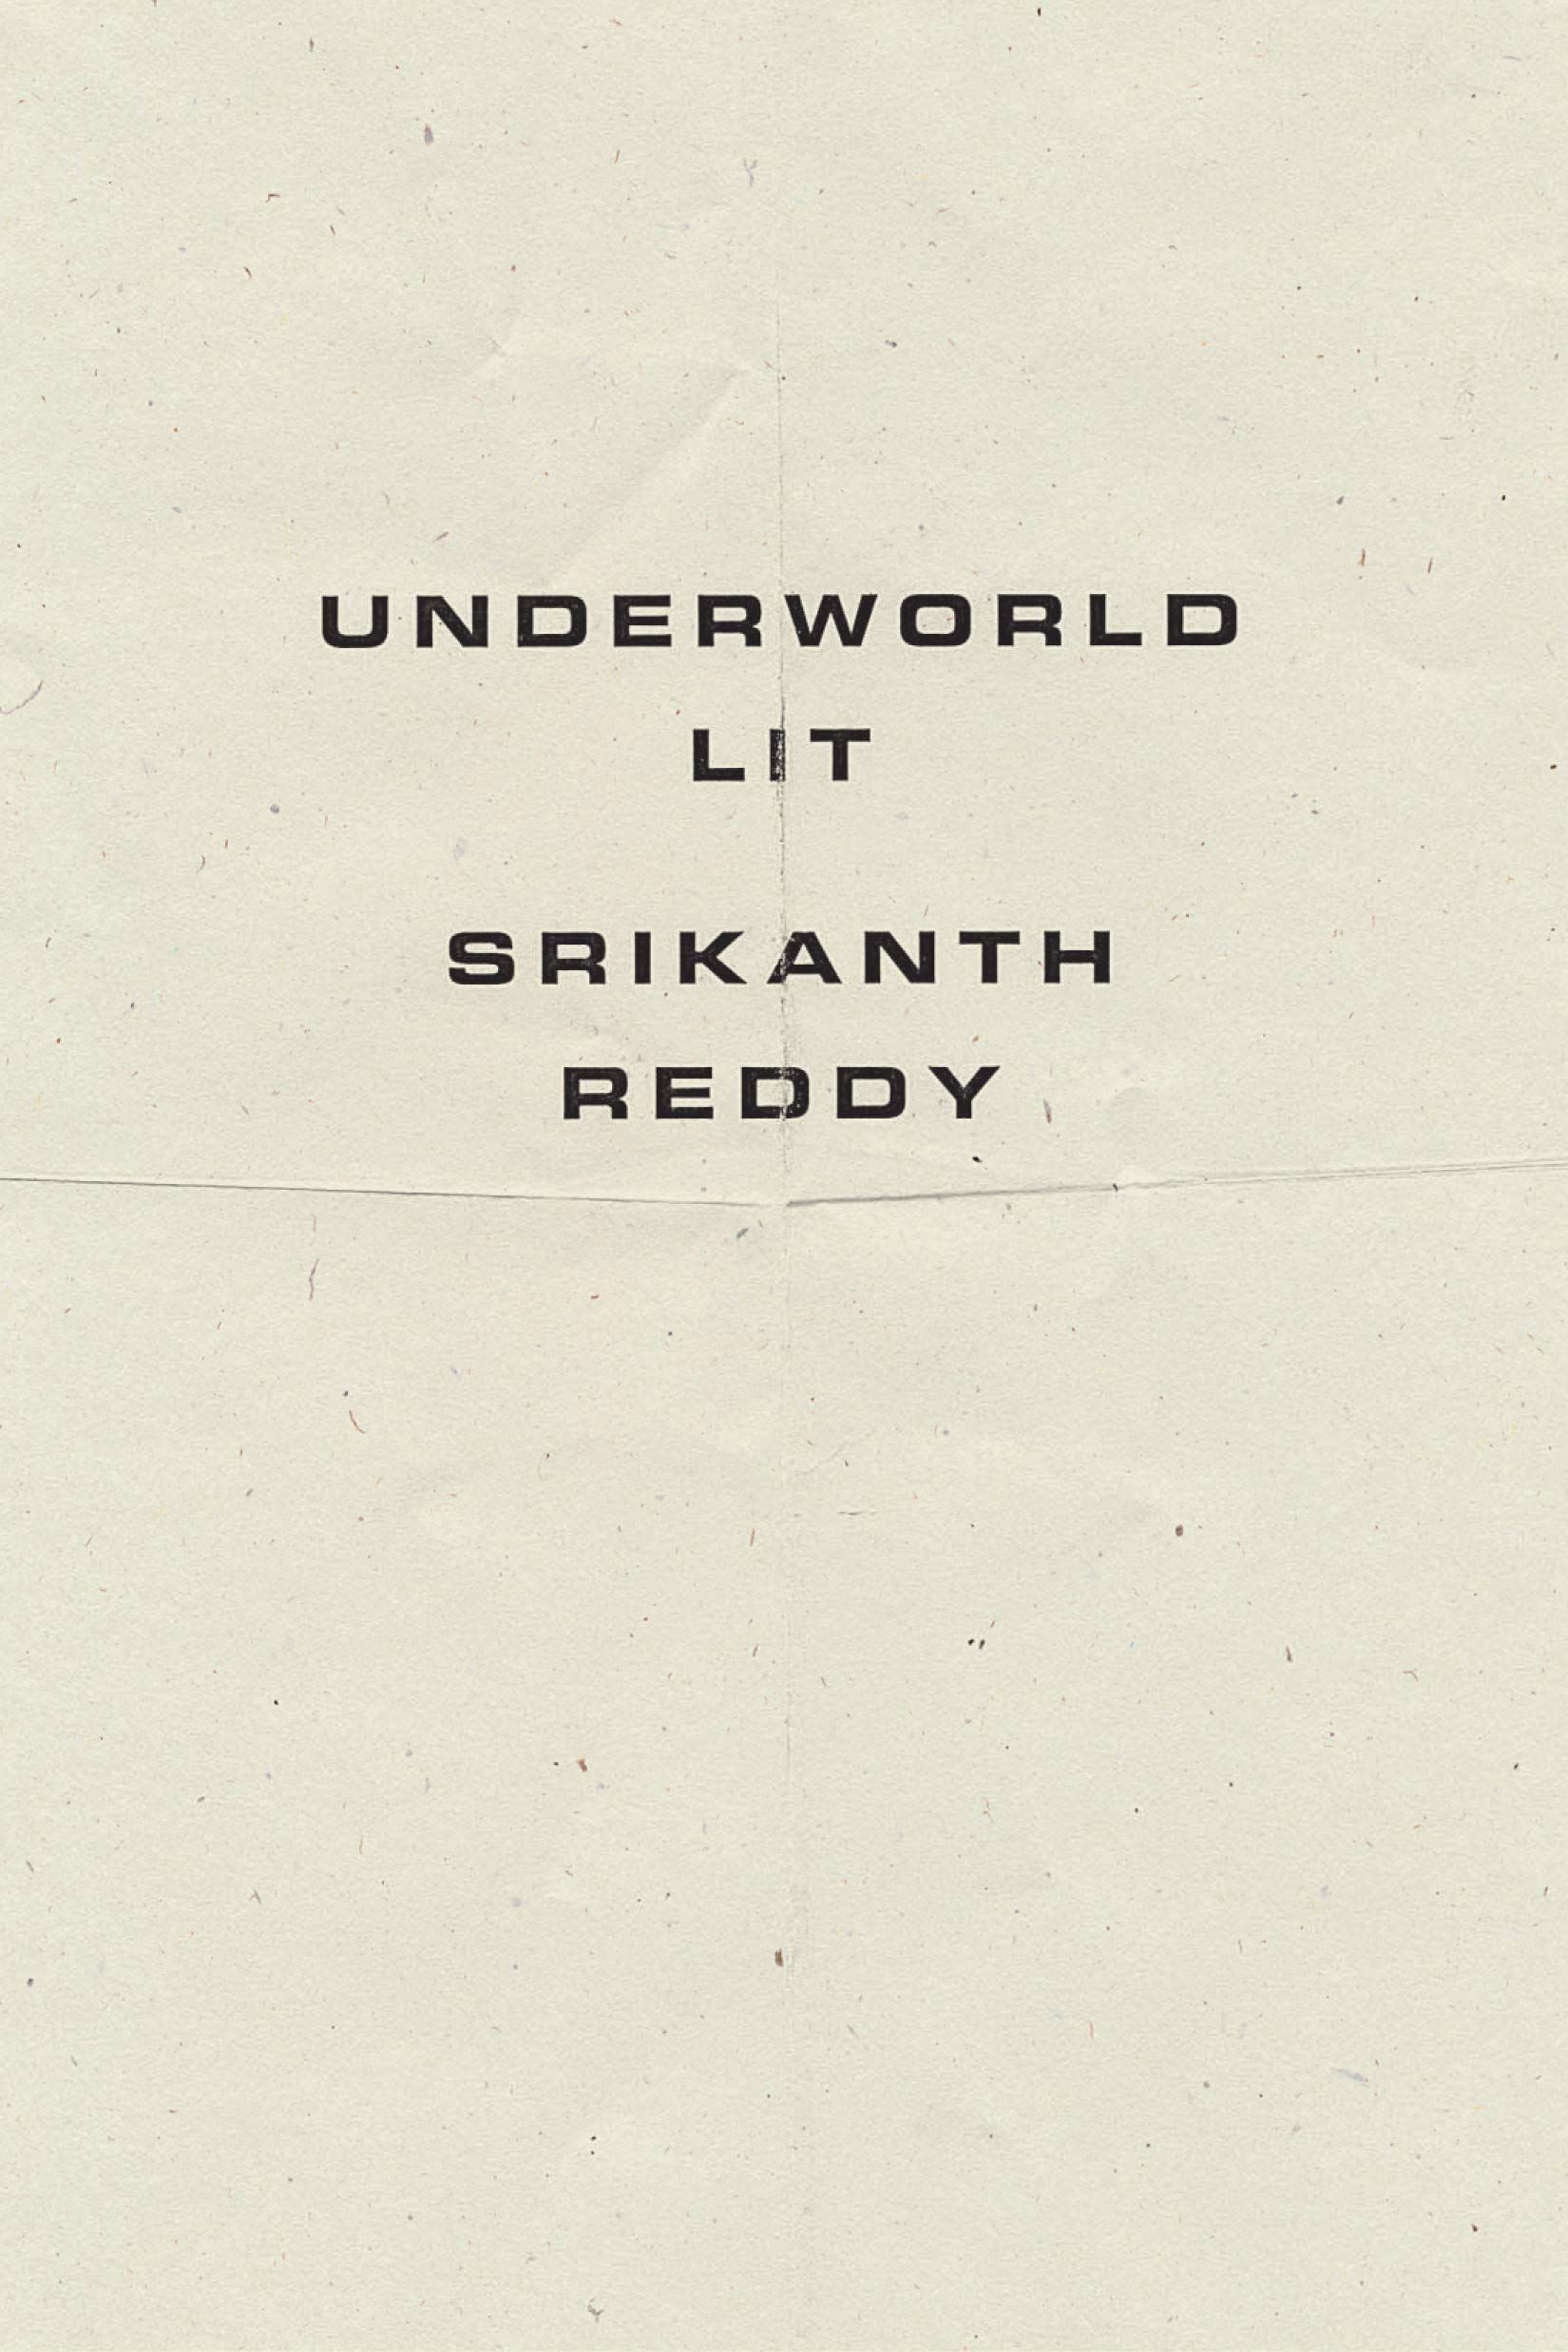 “All of the Above”: On Srikanth Reddy’s “Underworld Lit”